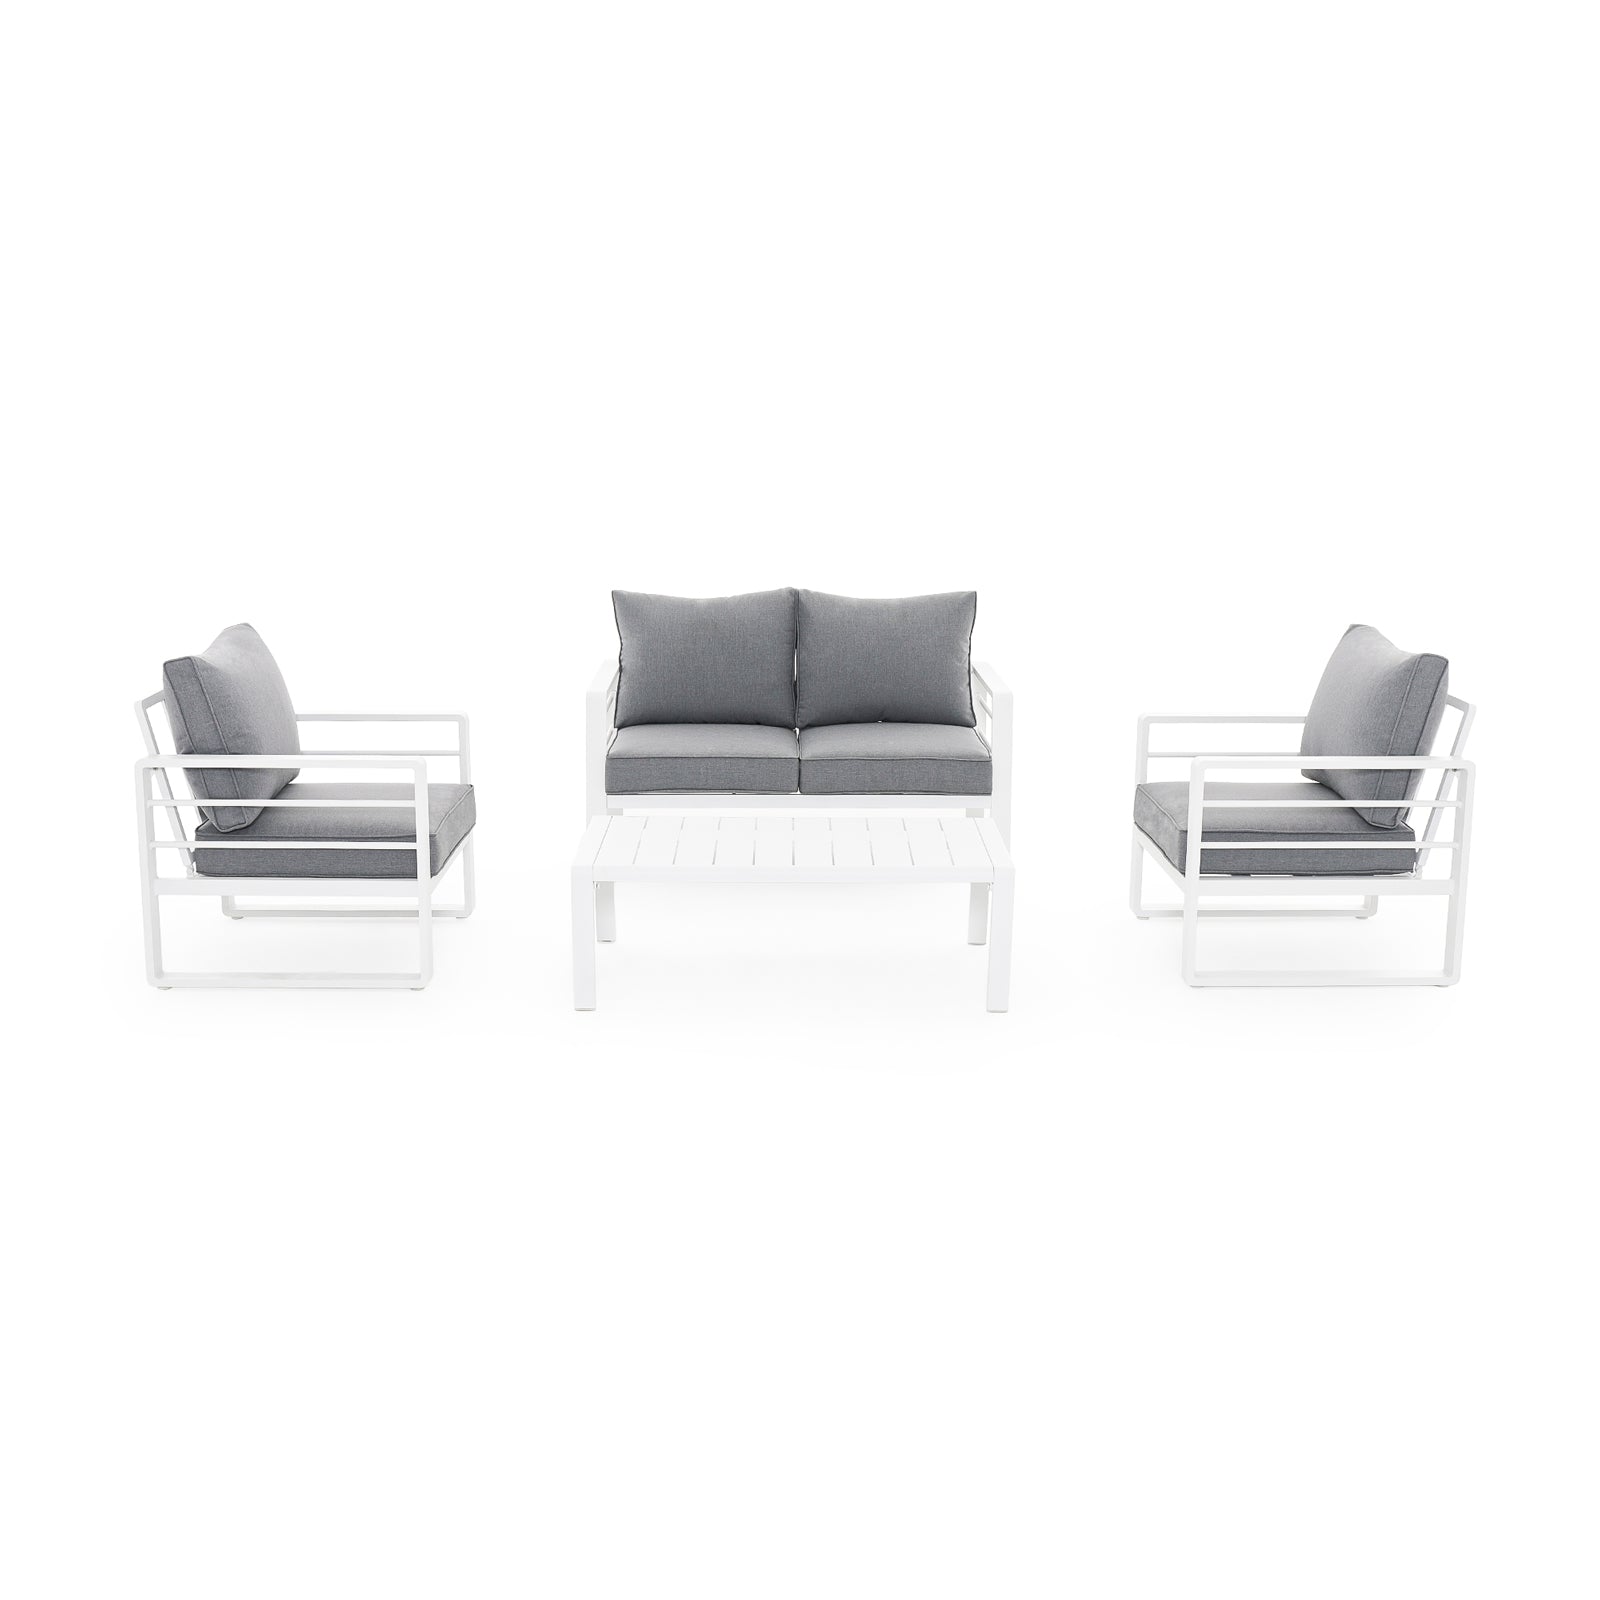 Salina Modern White Aluminum Outdoor Sofa Set with Grey Cushions, a 2-seater sofa, 2 armchairs, 1 rectangle coffee table, front view - Jardina Furniture